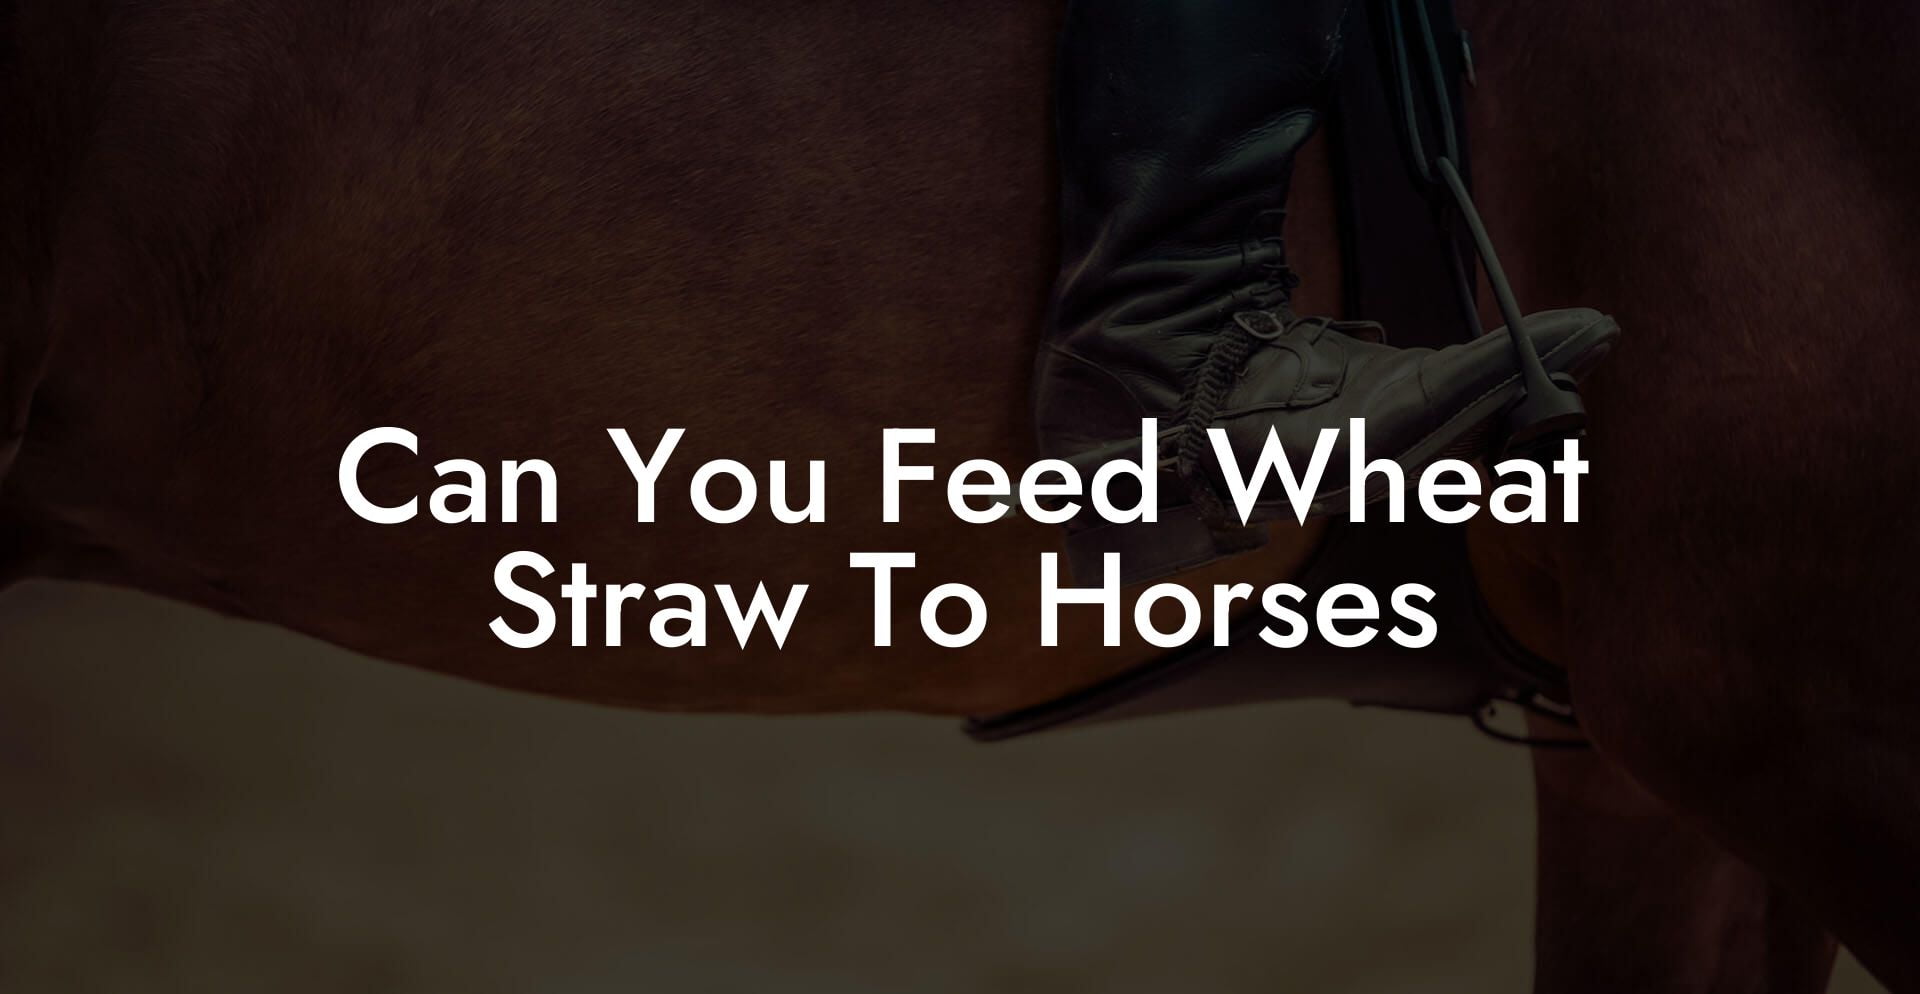 Can You Feed Wheat Straw To Horses